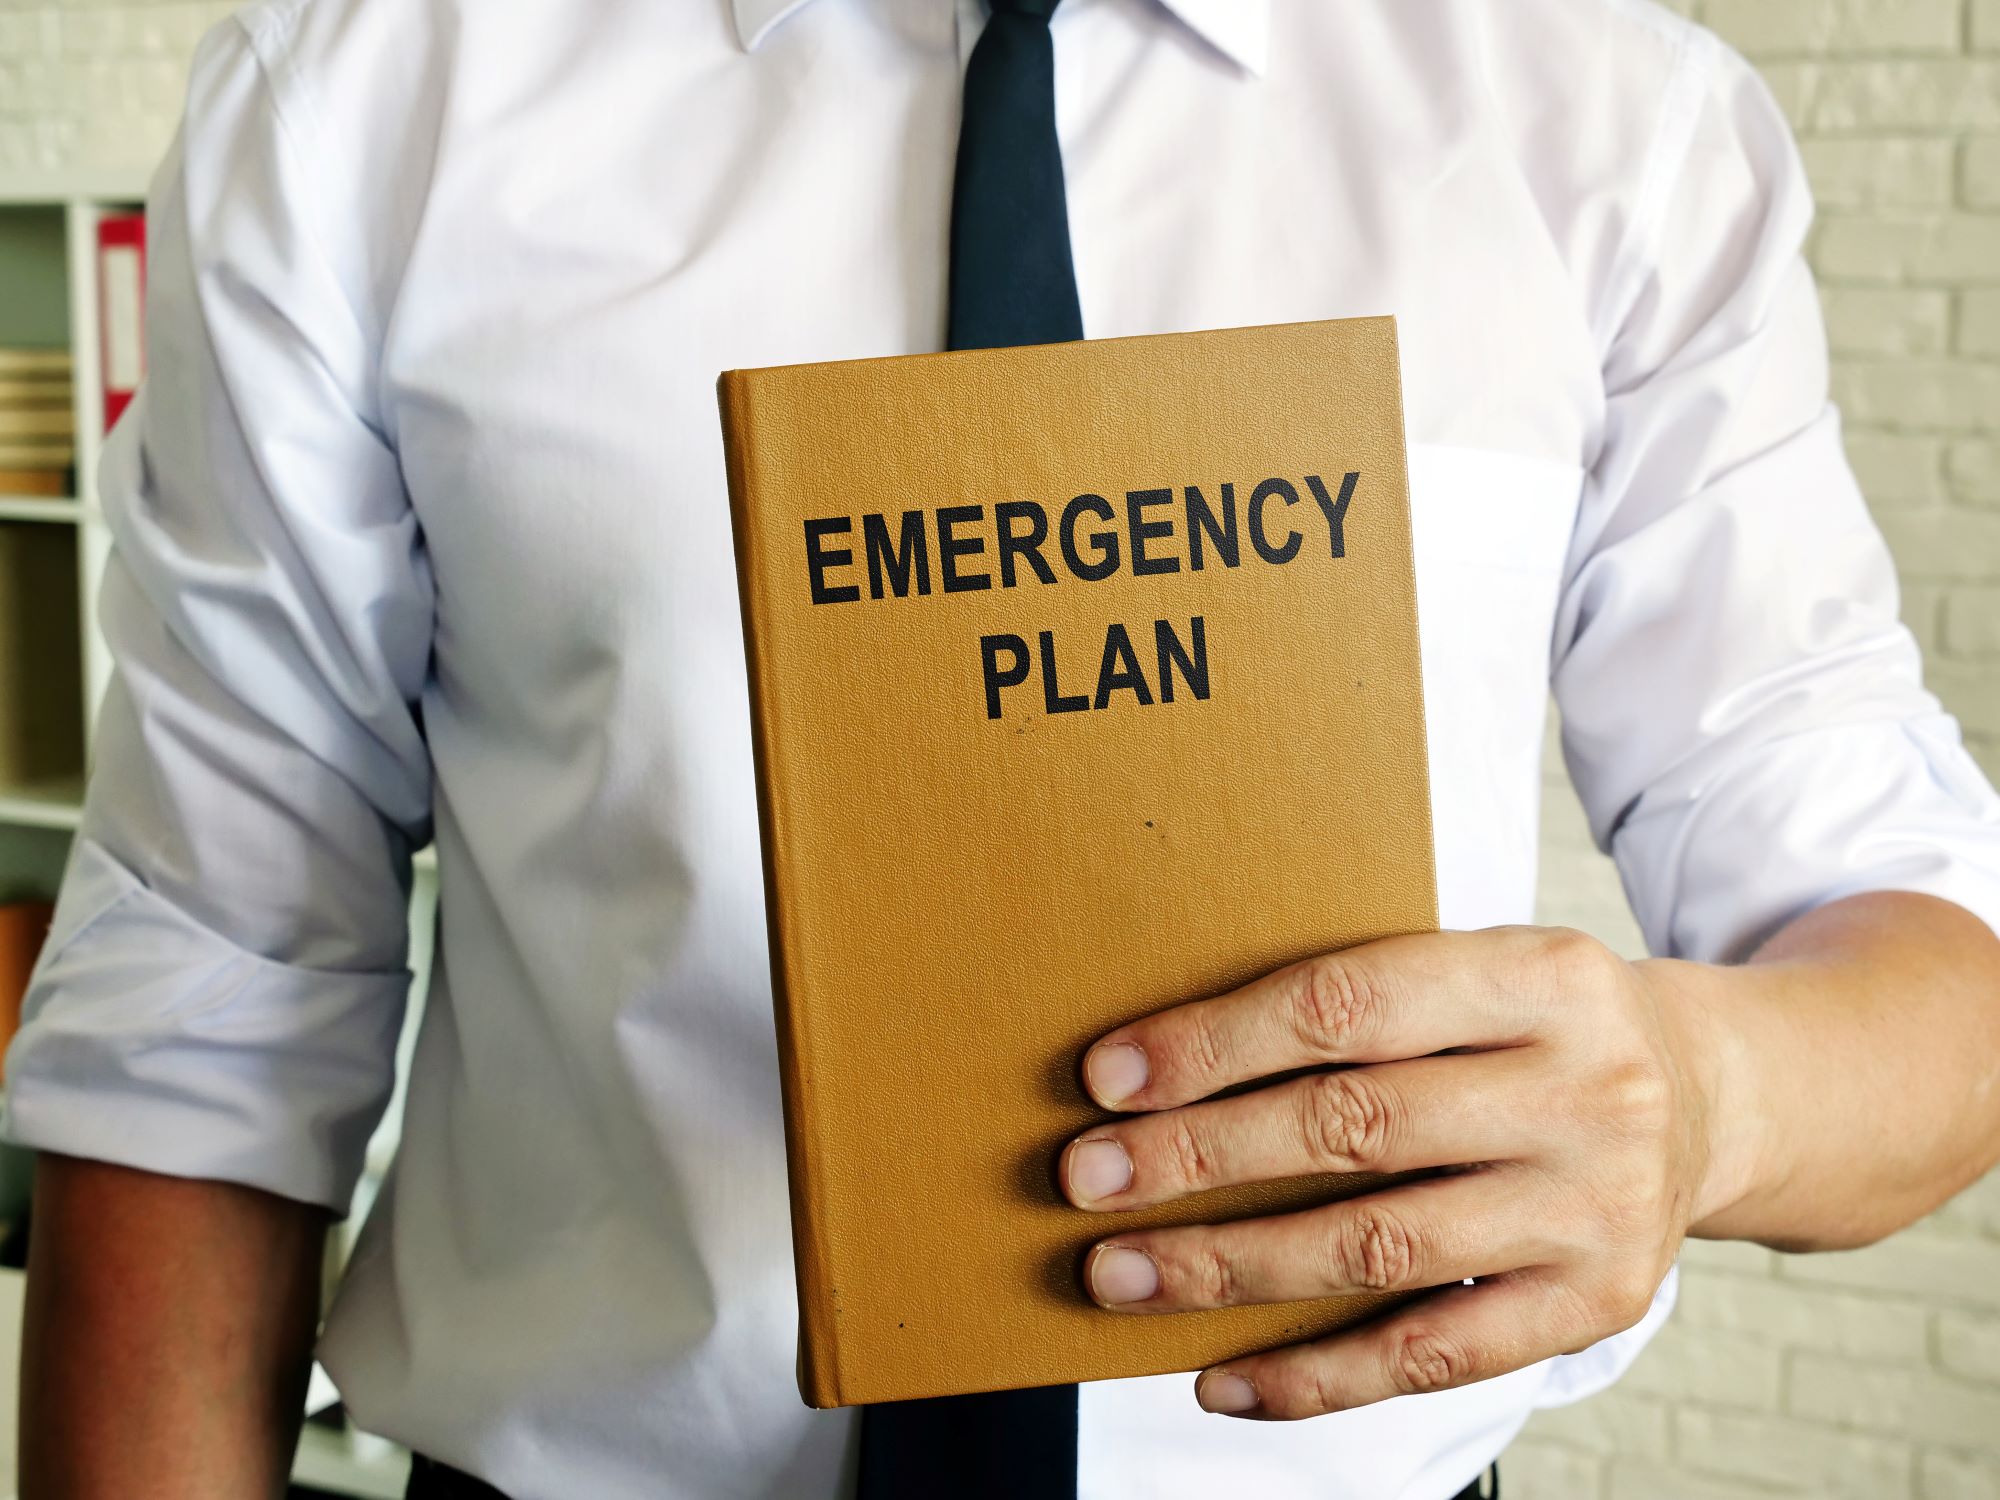 Photo of a person in a shirt and tie, holding an emergency plan book in front of them.